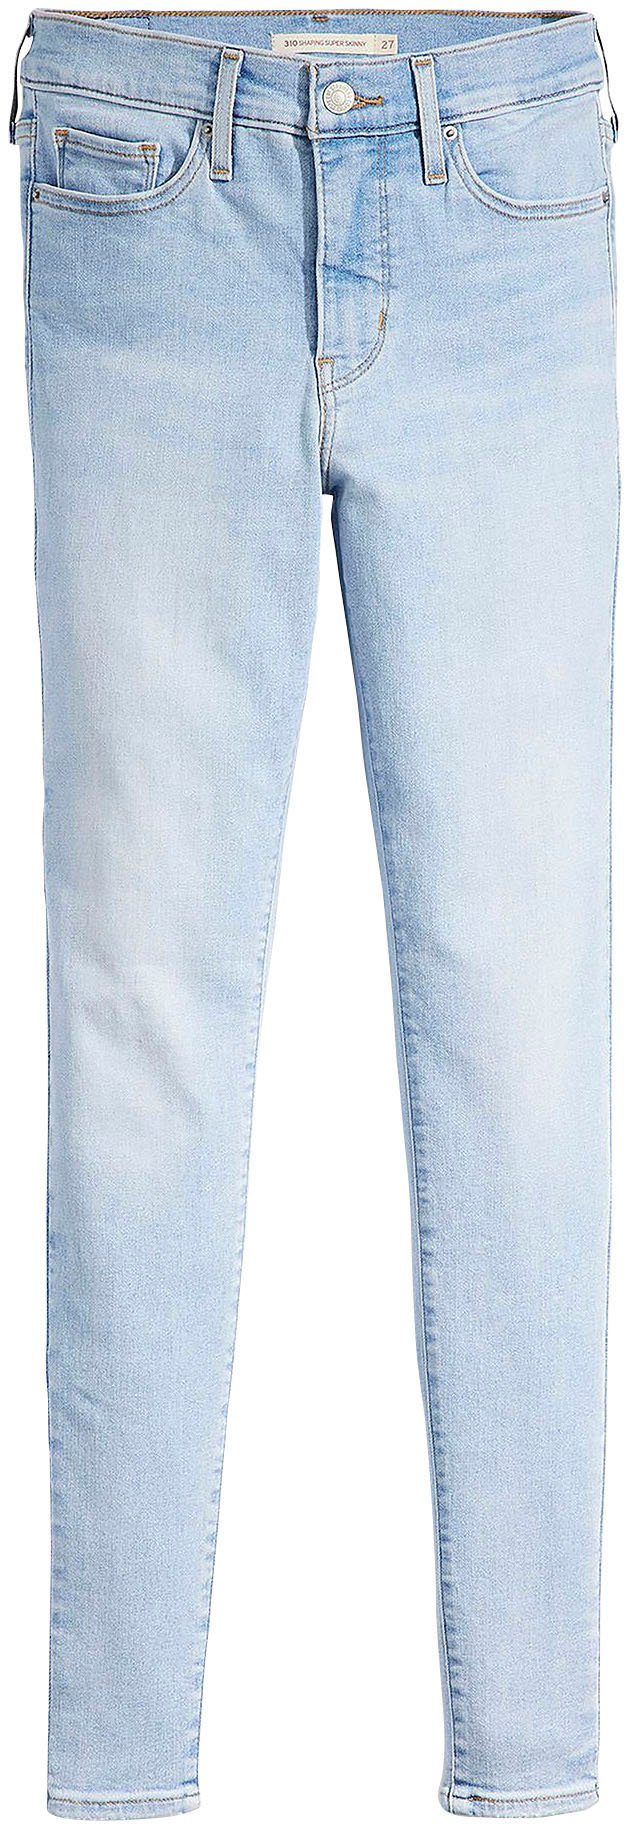 Levi's Skinny fit jeans 310 Shaping Super Skinny